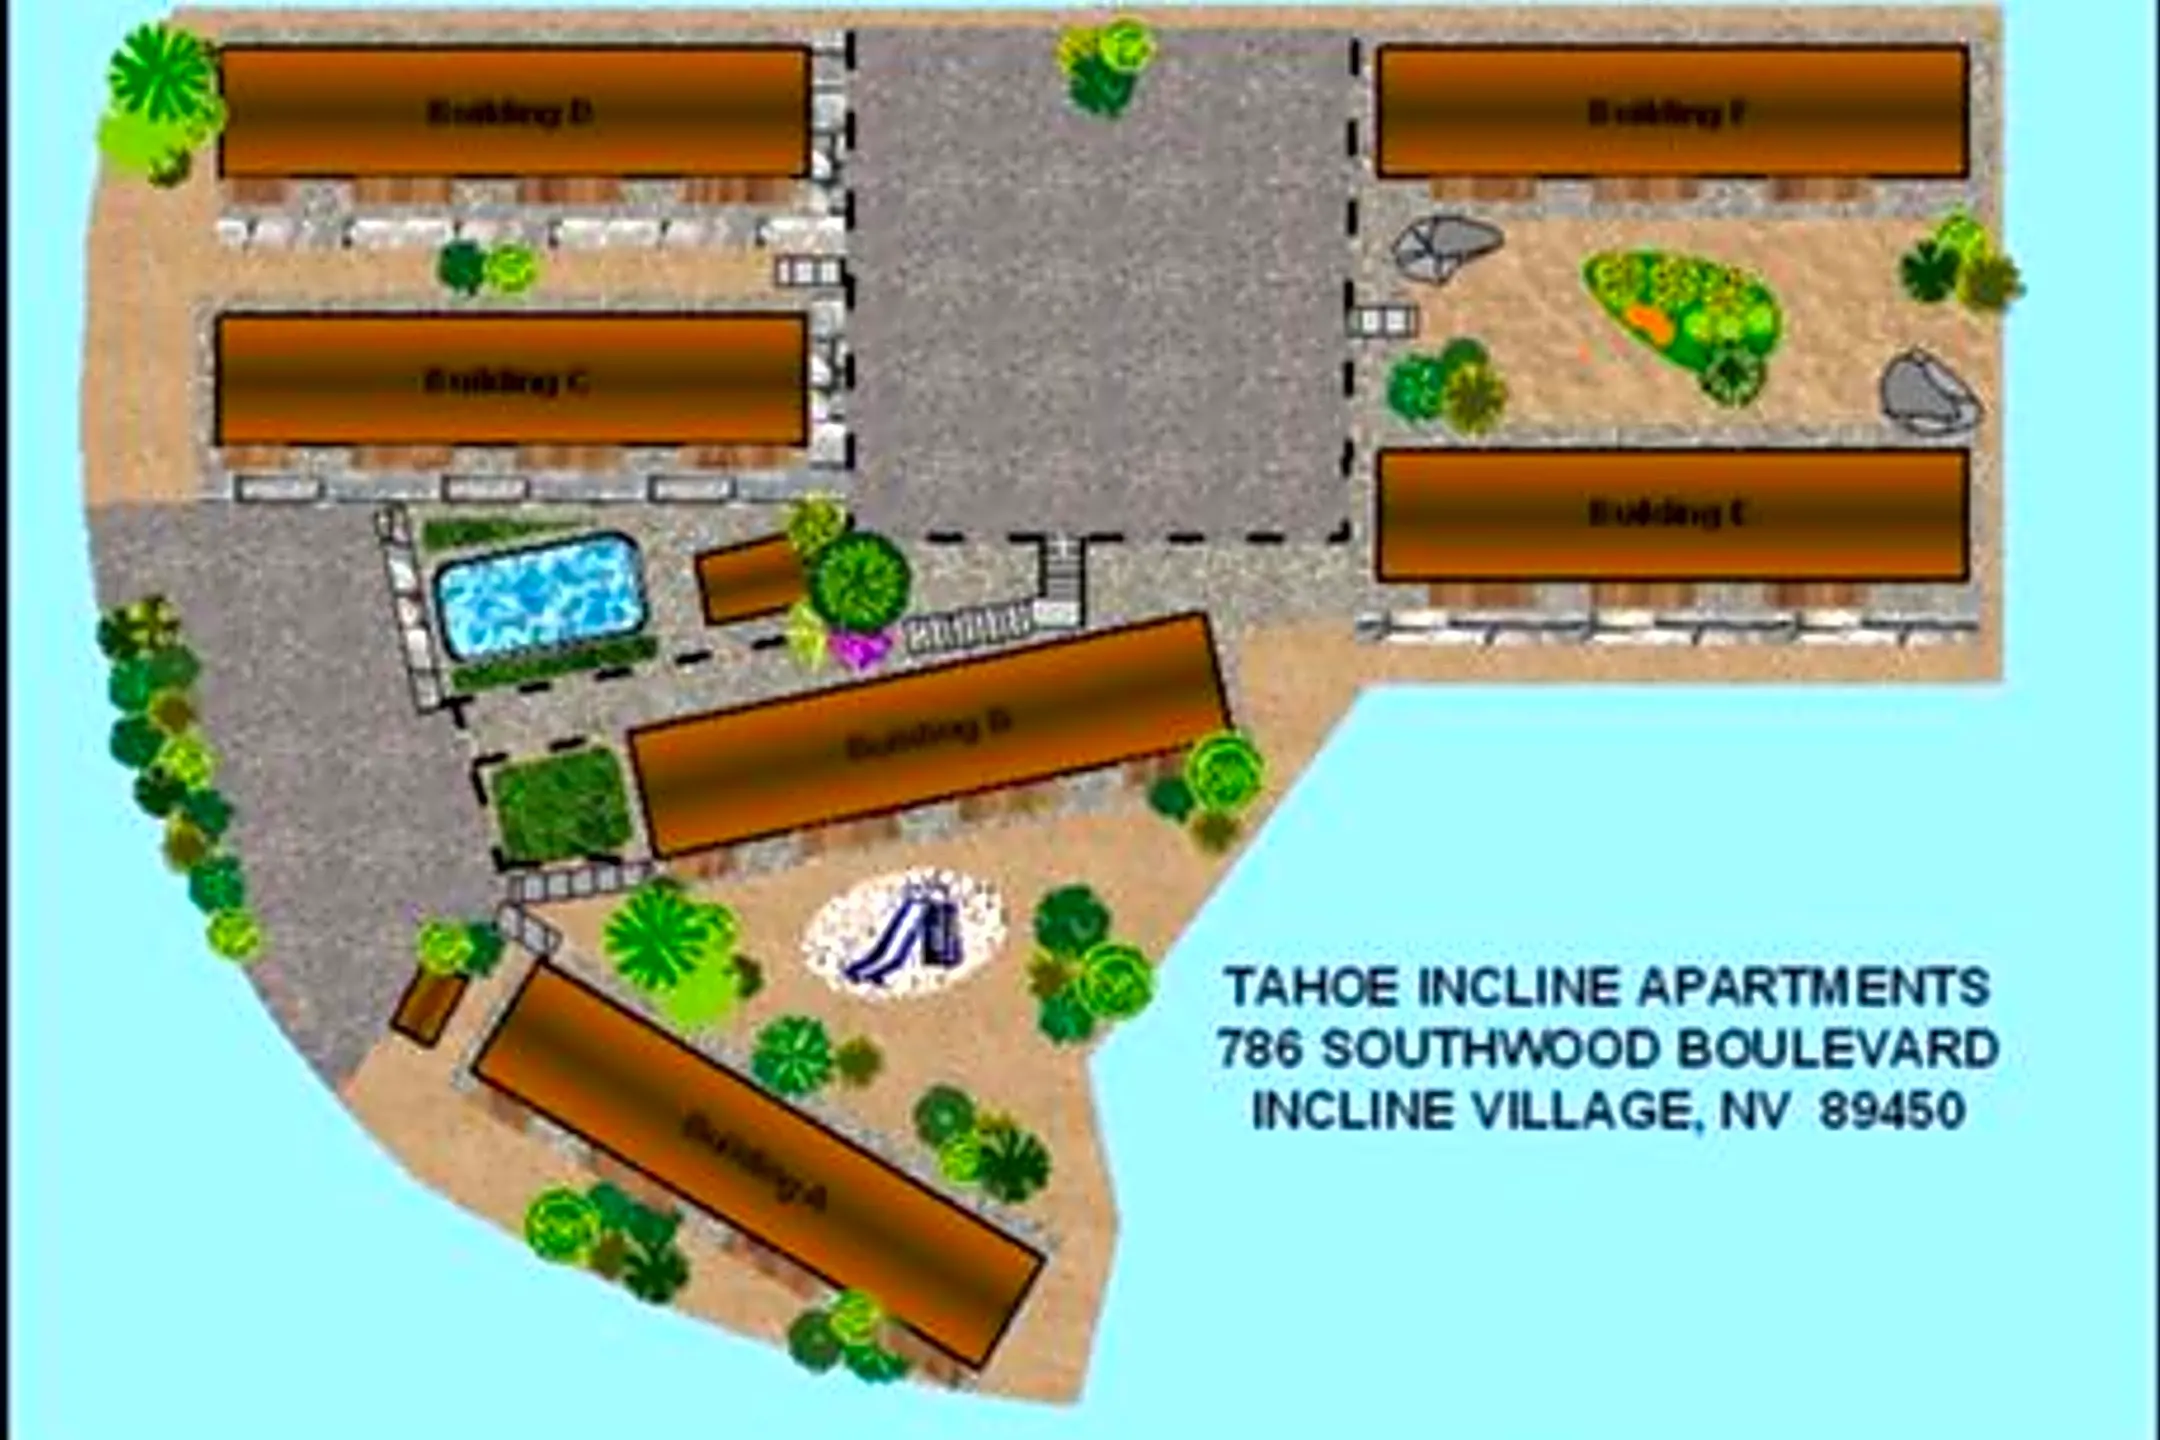 Tahoe Incline Apartments - Incline Village, NV